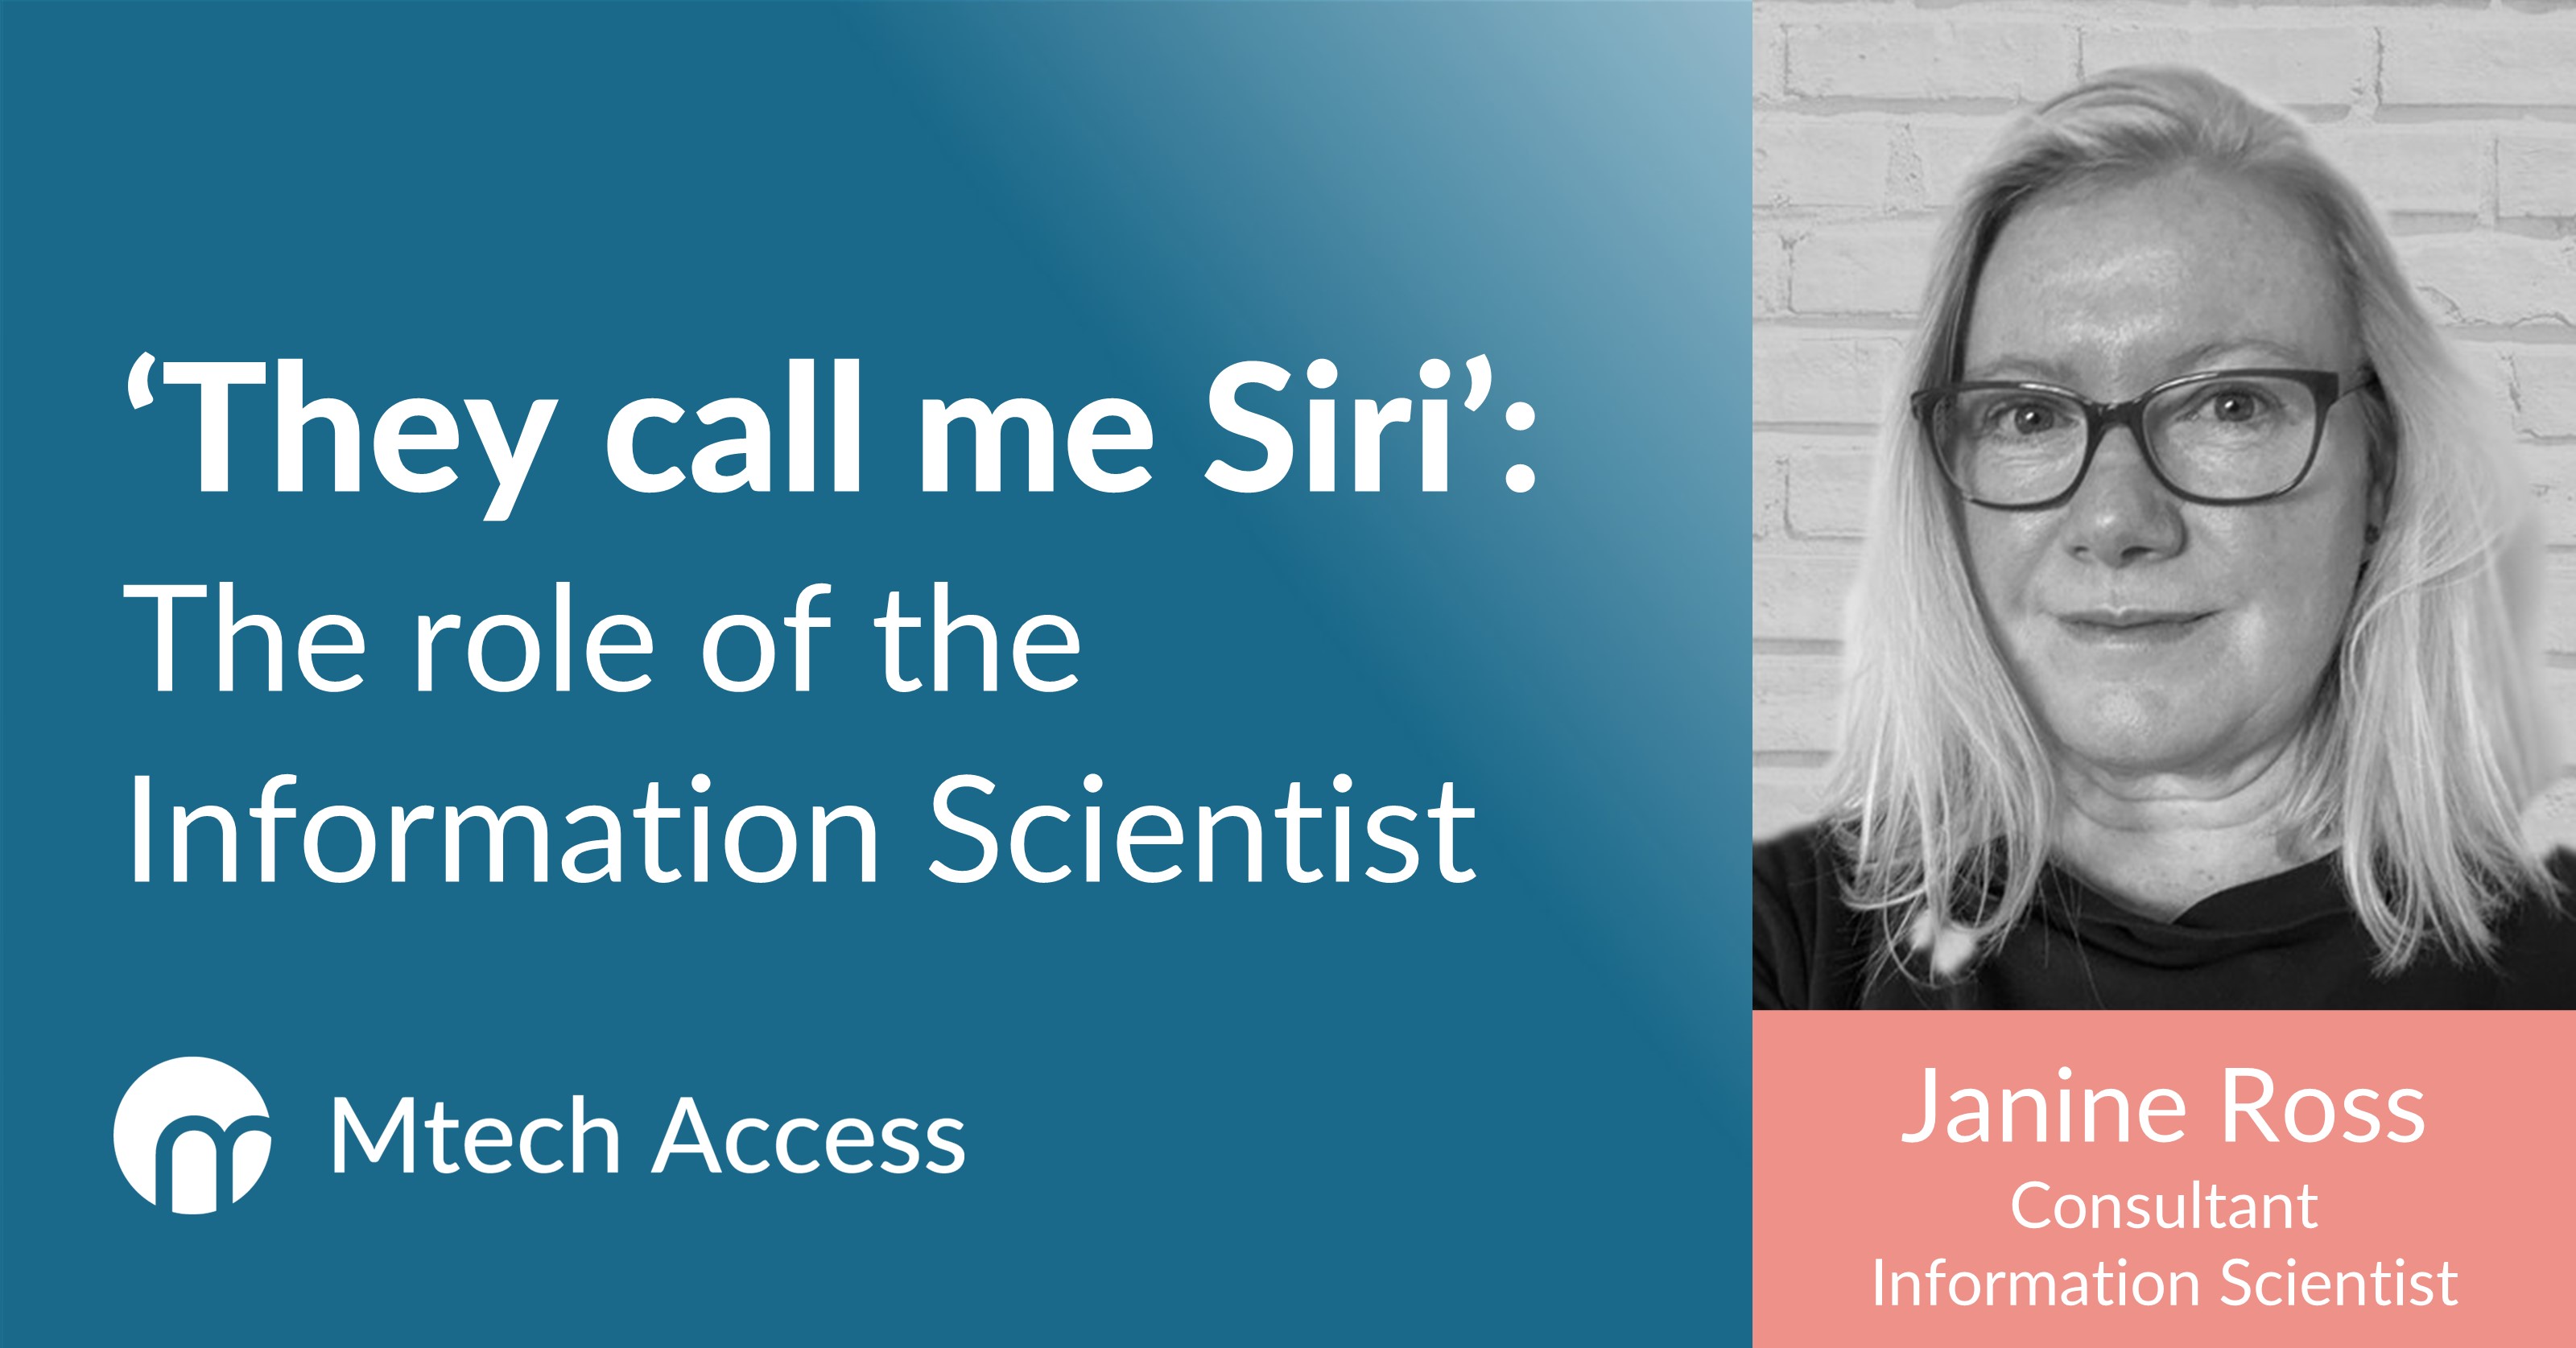 'They call me Siri': The role of the Information Scientist - Janine Ross